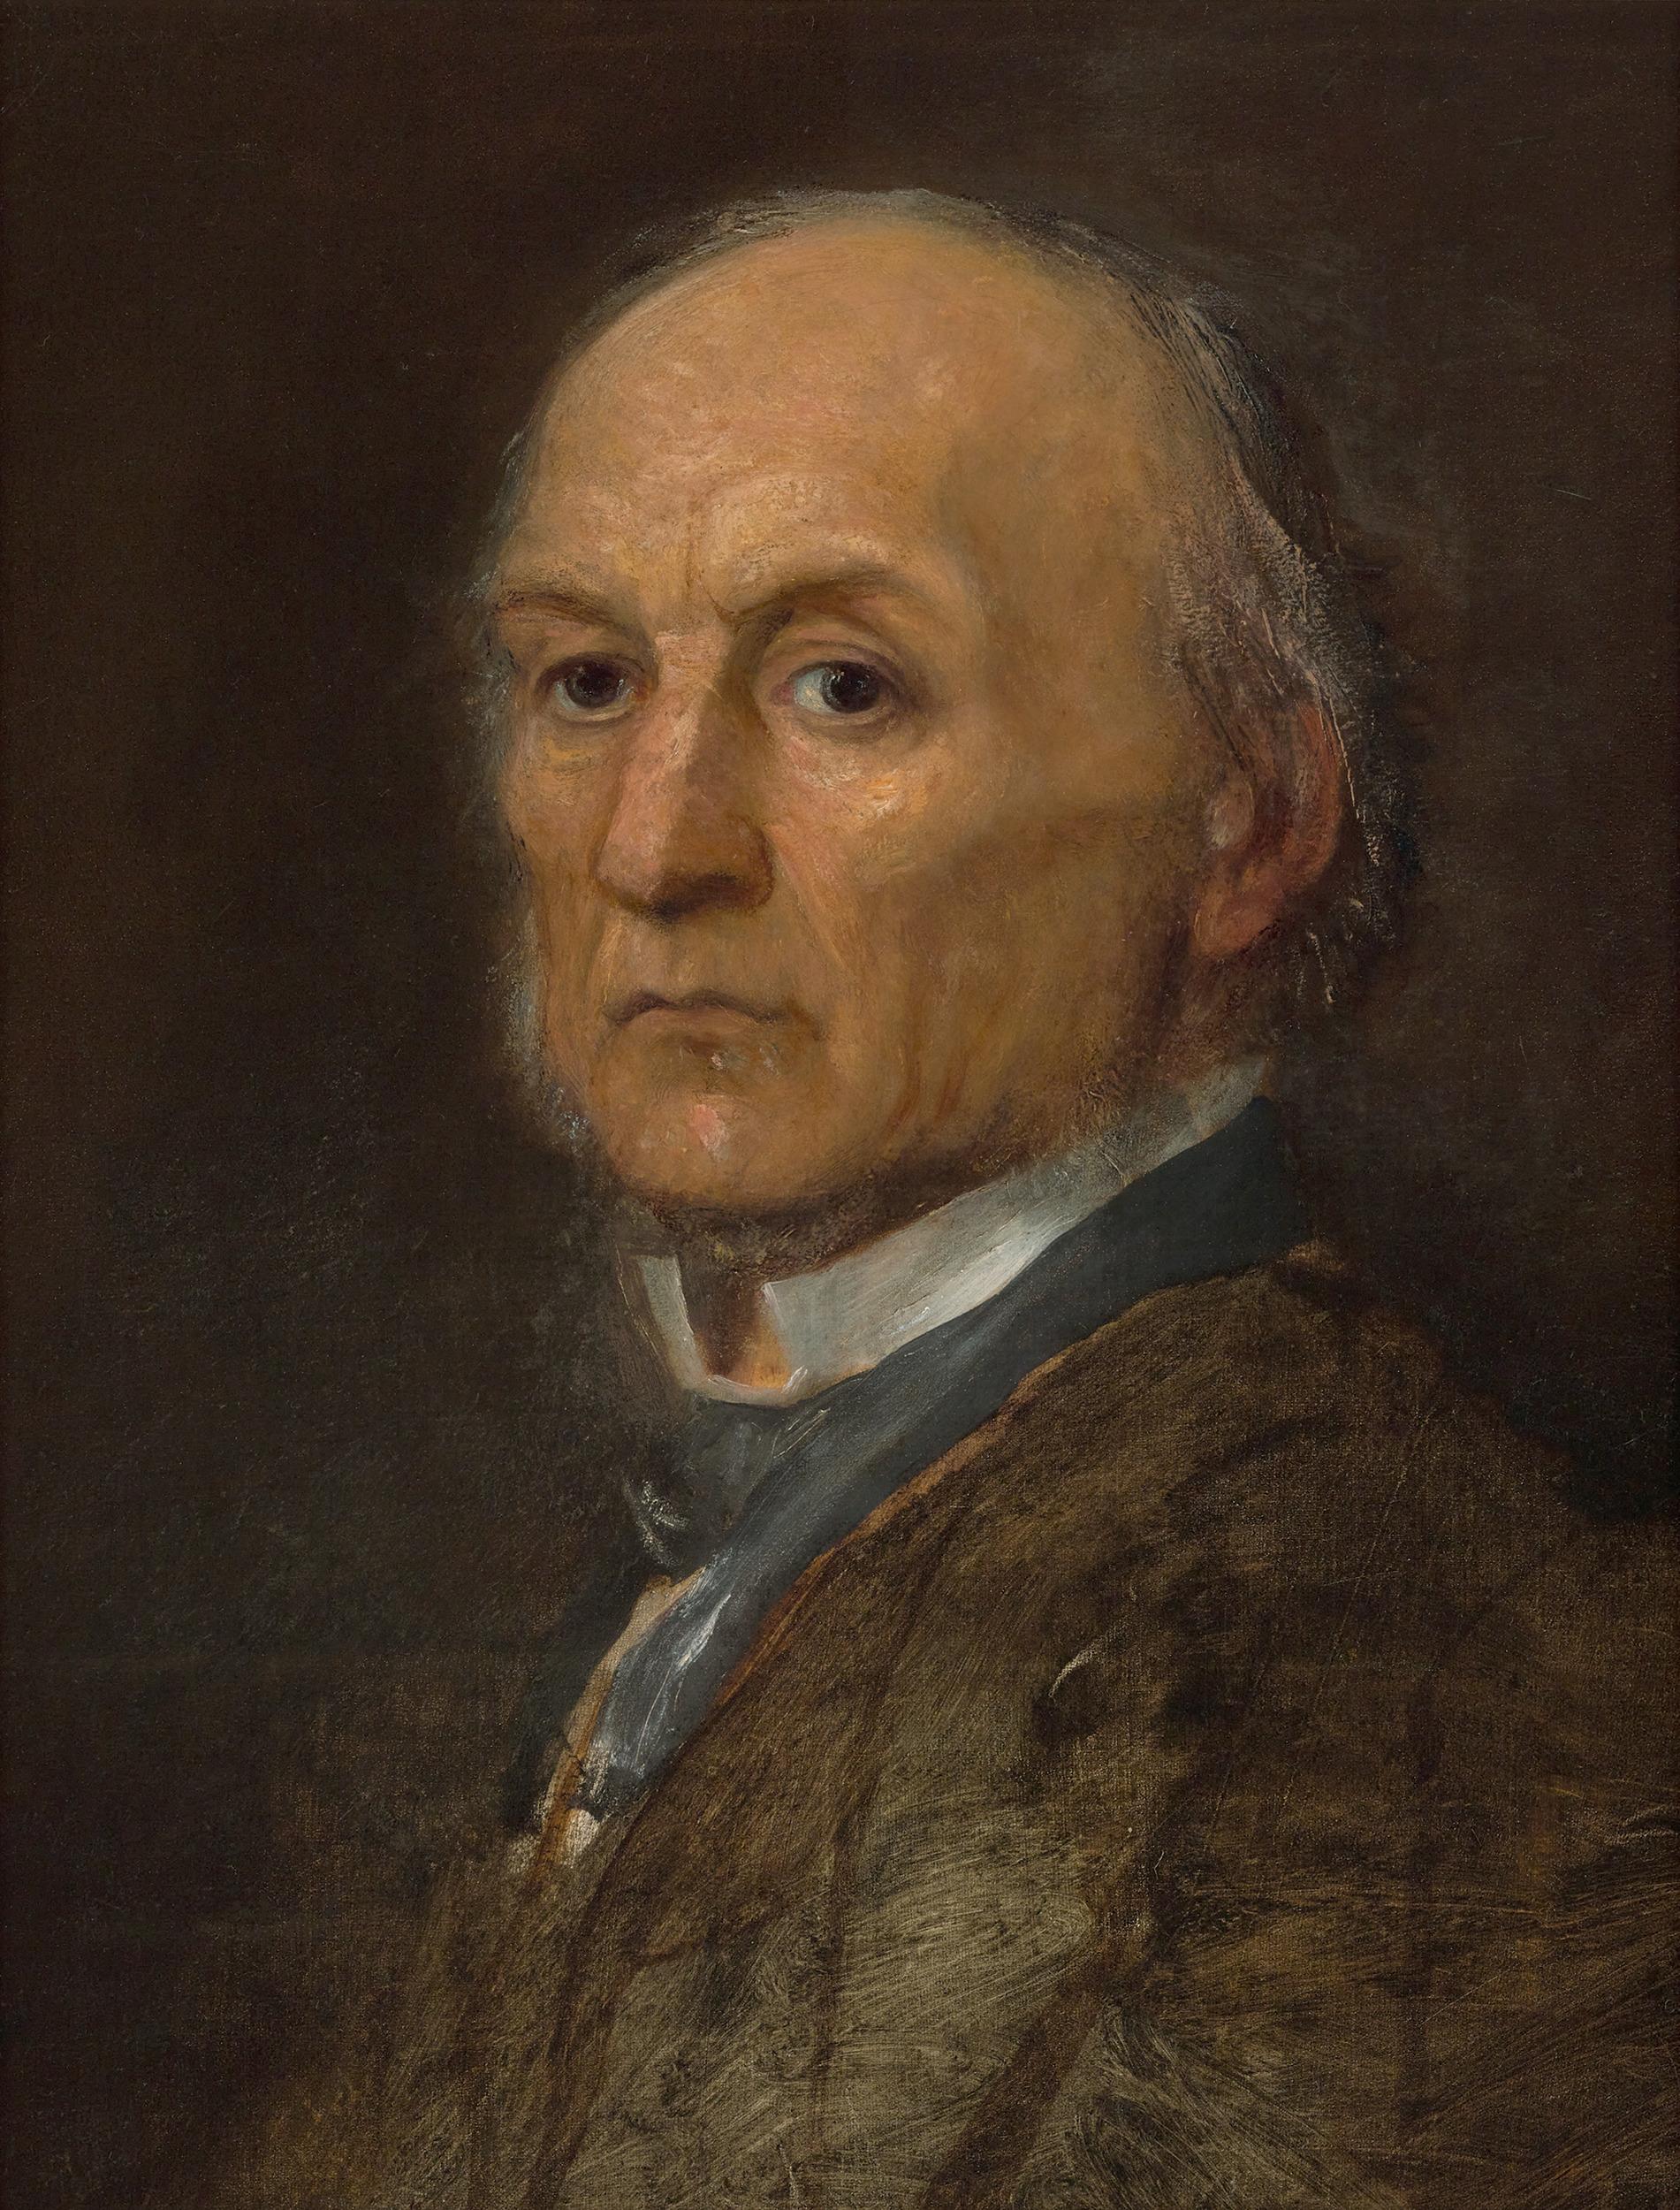 George Frederic Watts OM RA Portrait Painting - Portrait Of Prime Minister William Ewart Gladstone By George Frederic Watts